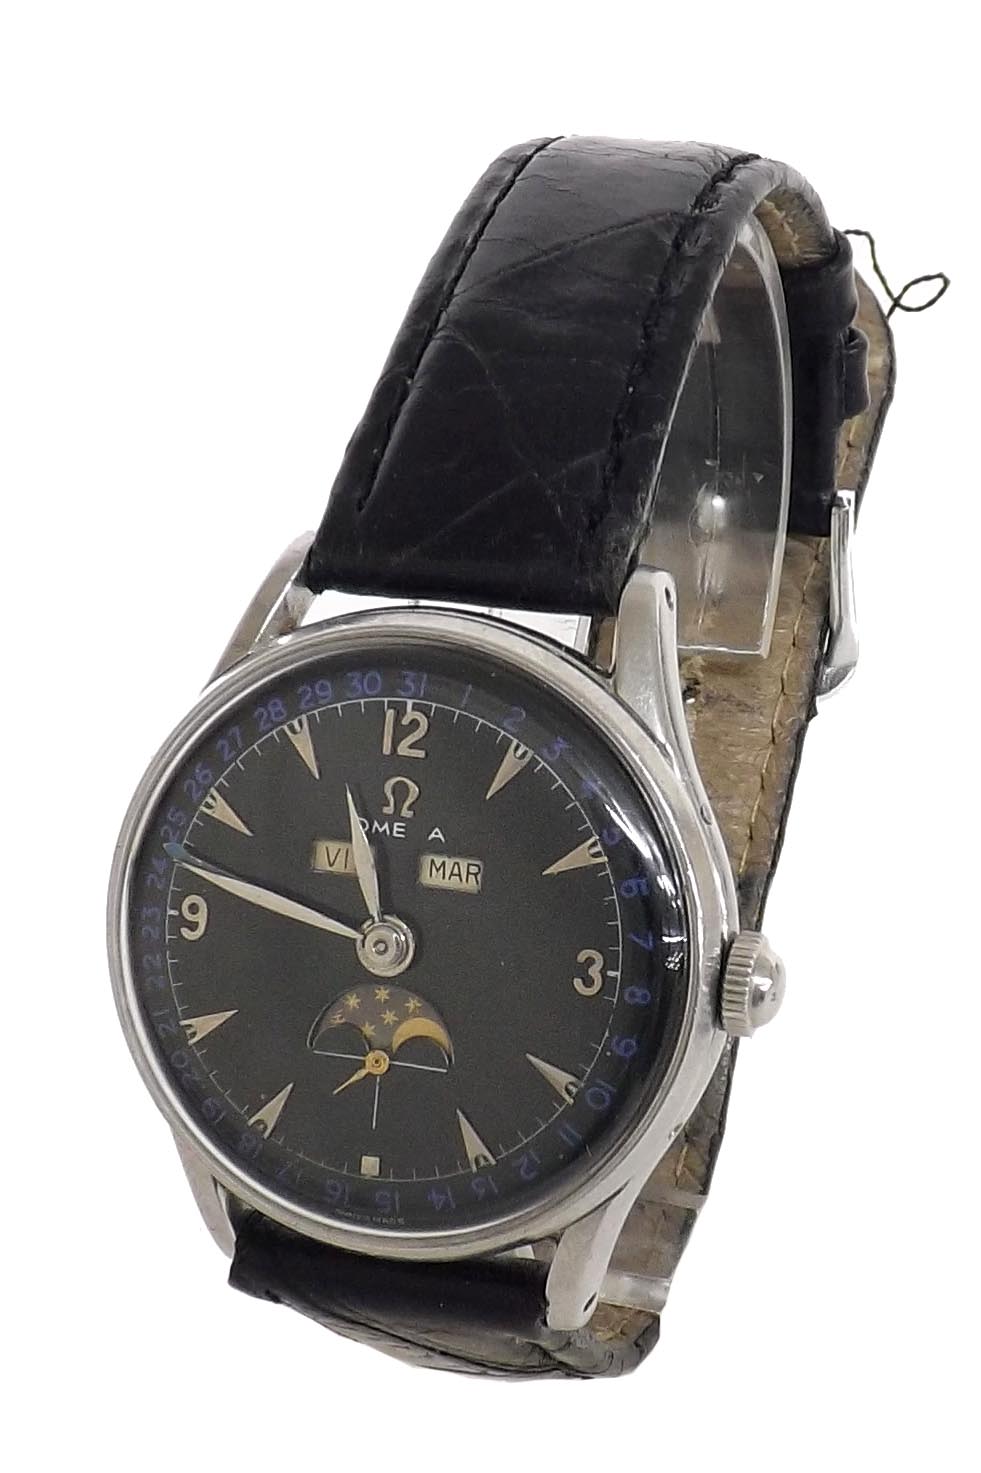 Omega Triple Date Moon Phase stainless steel gentleman's wristwatch, ref. 2471-7, circa 1950, the